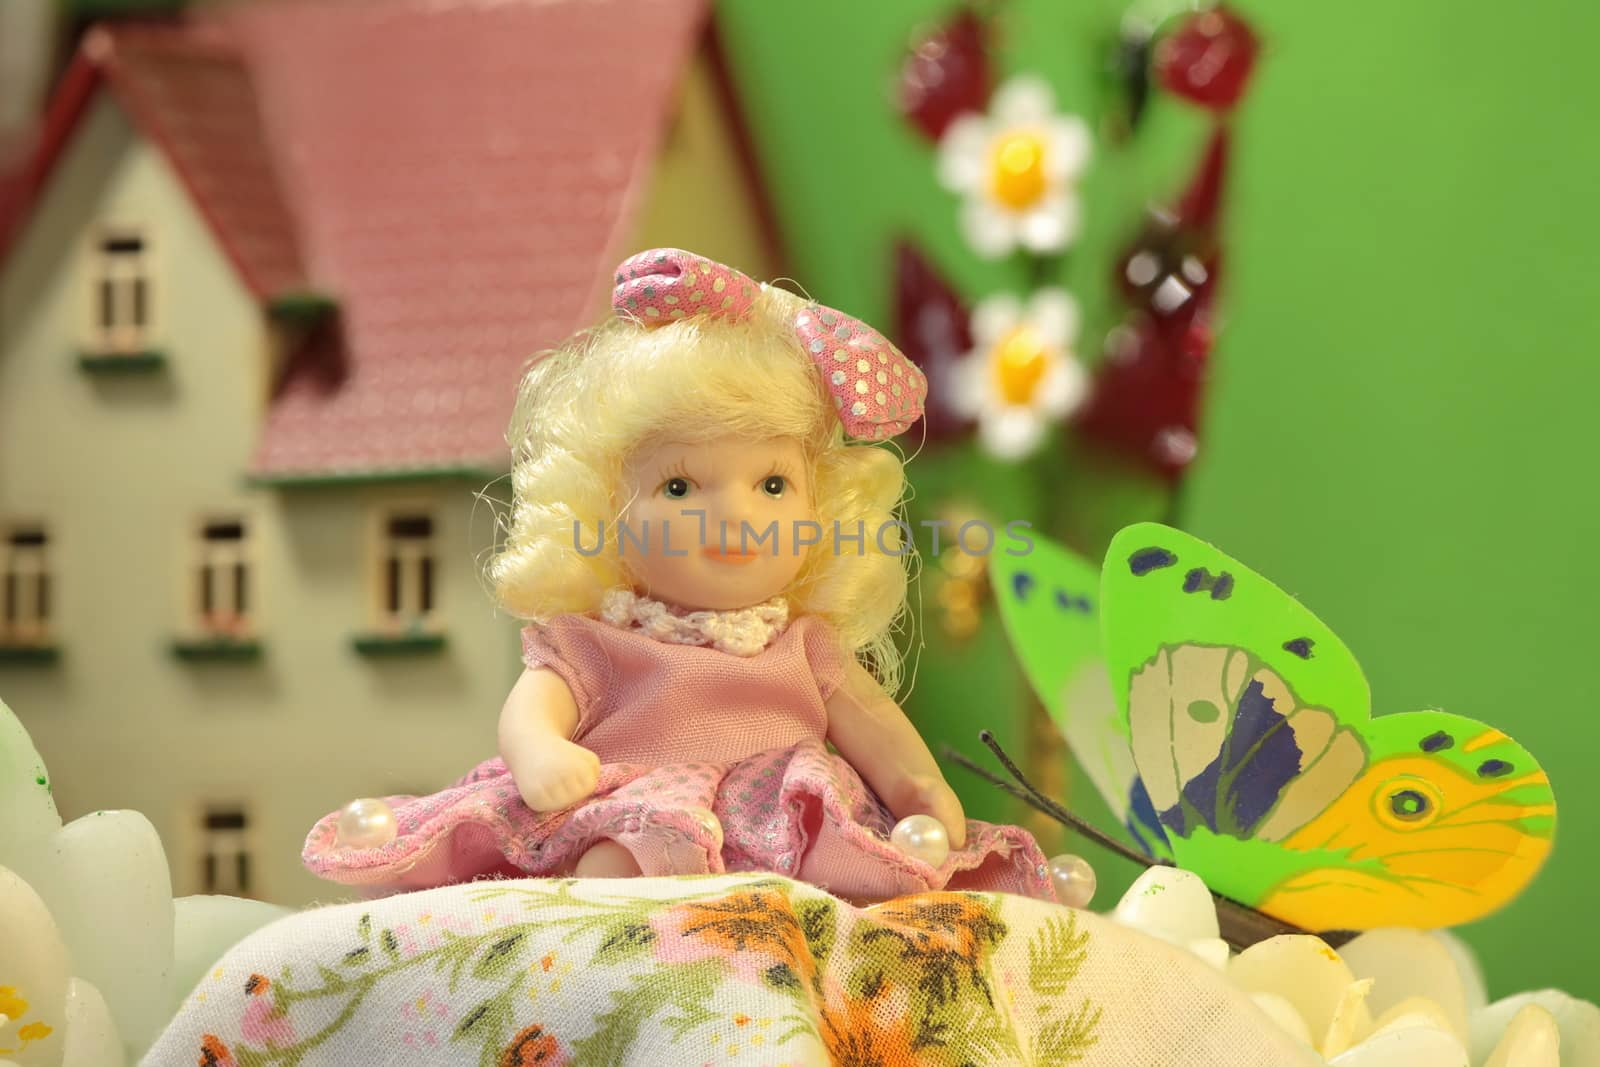 Thumbelina girl among the flowers in Puppet town